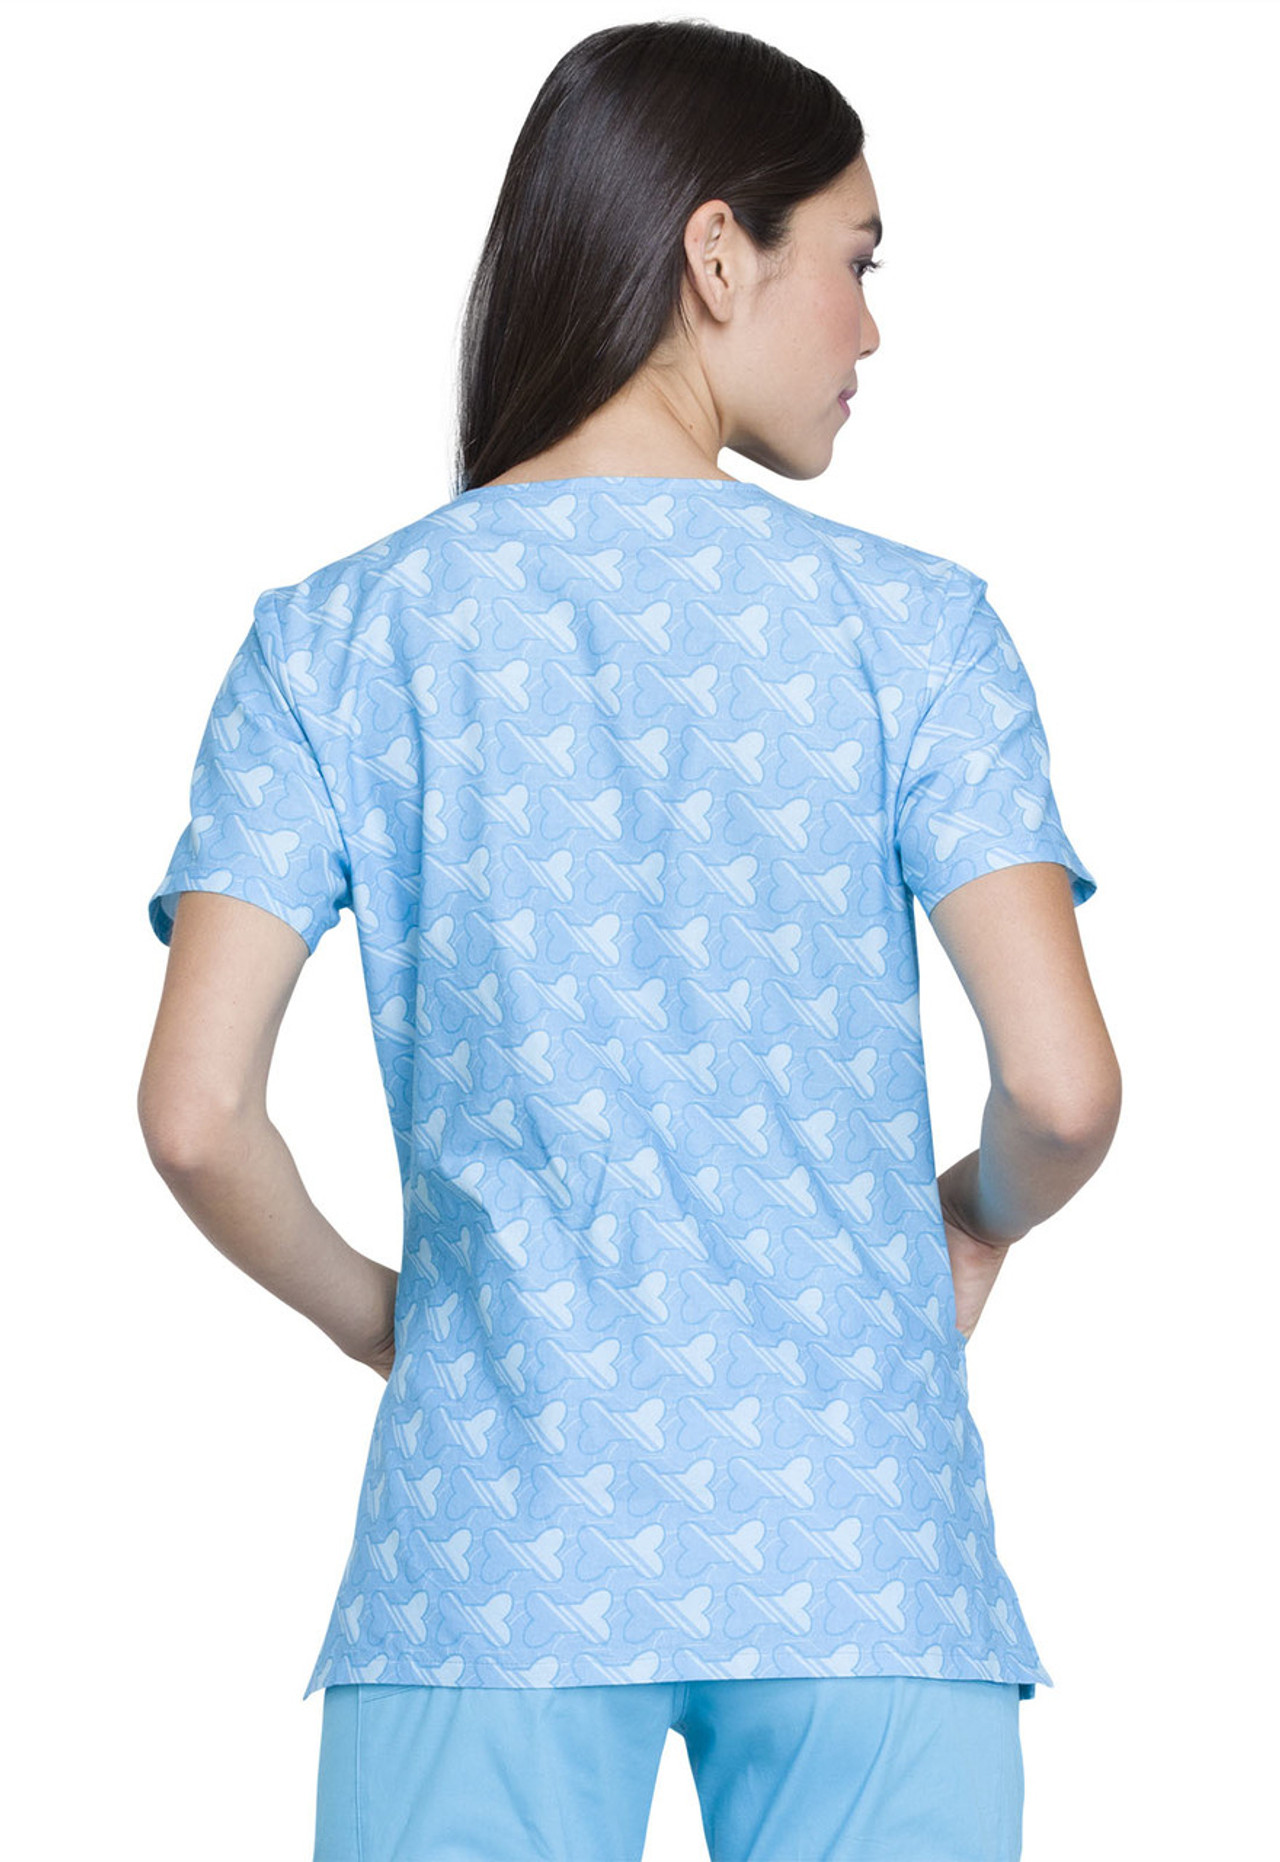 The Secret Life of Pets Scrub Top For Women